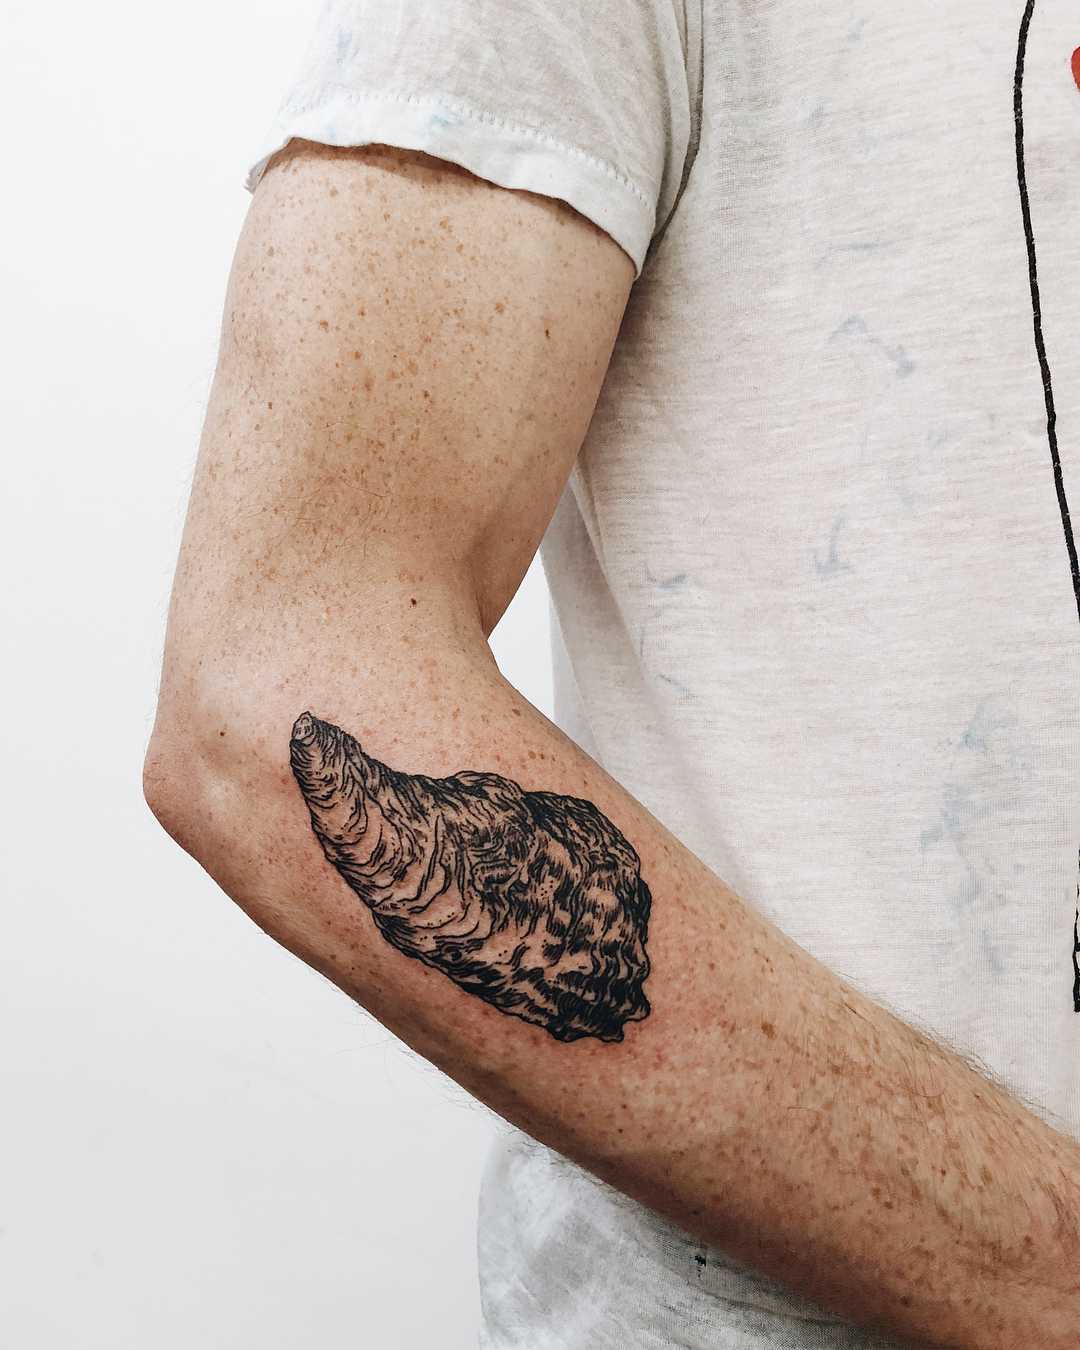 Oyster tattoo on the forearm